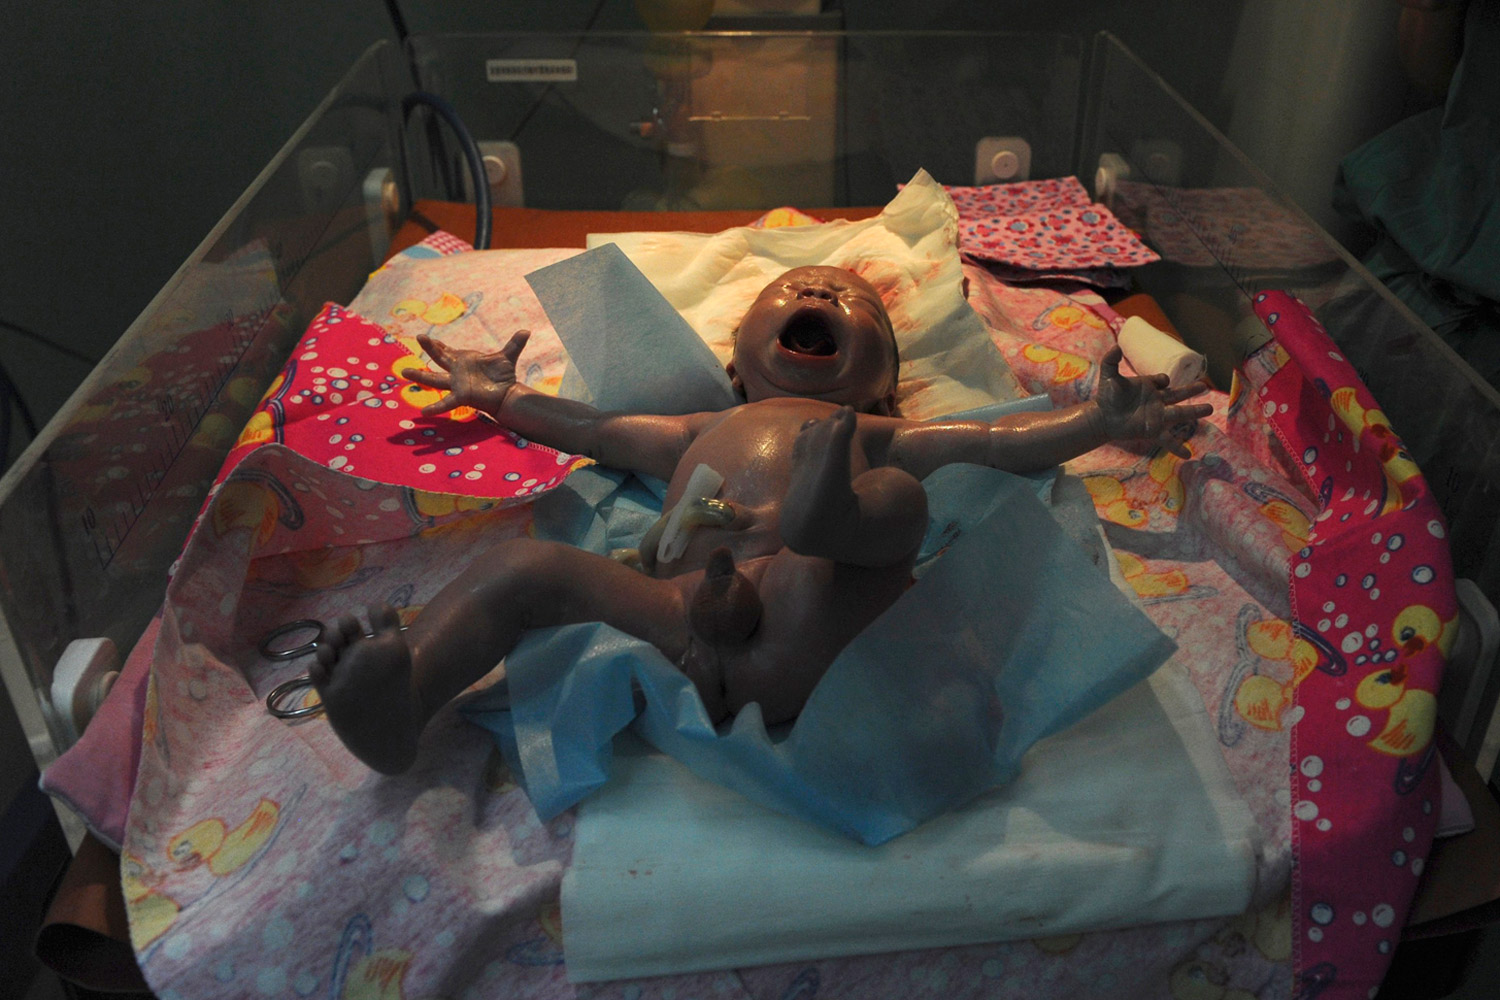 June 4, 2012. A newborn baby stretches in a hospital bassinet after being cleaned following a caesarean section at a hospital in Shaya county, Xinjiang Uighur Autonomous Region, China.